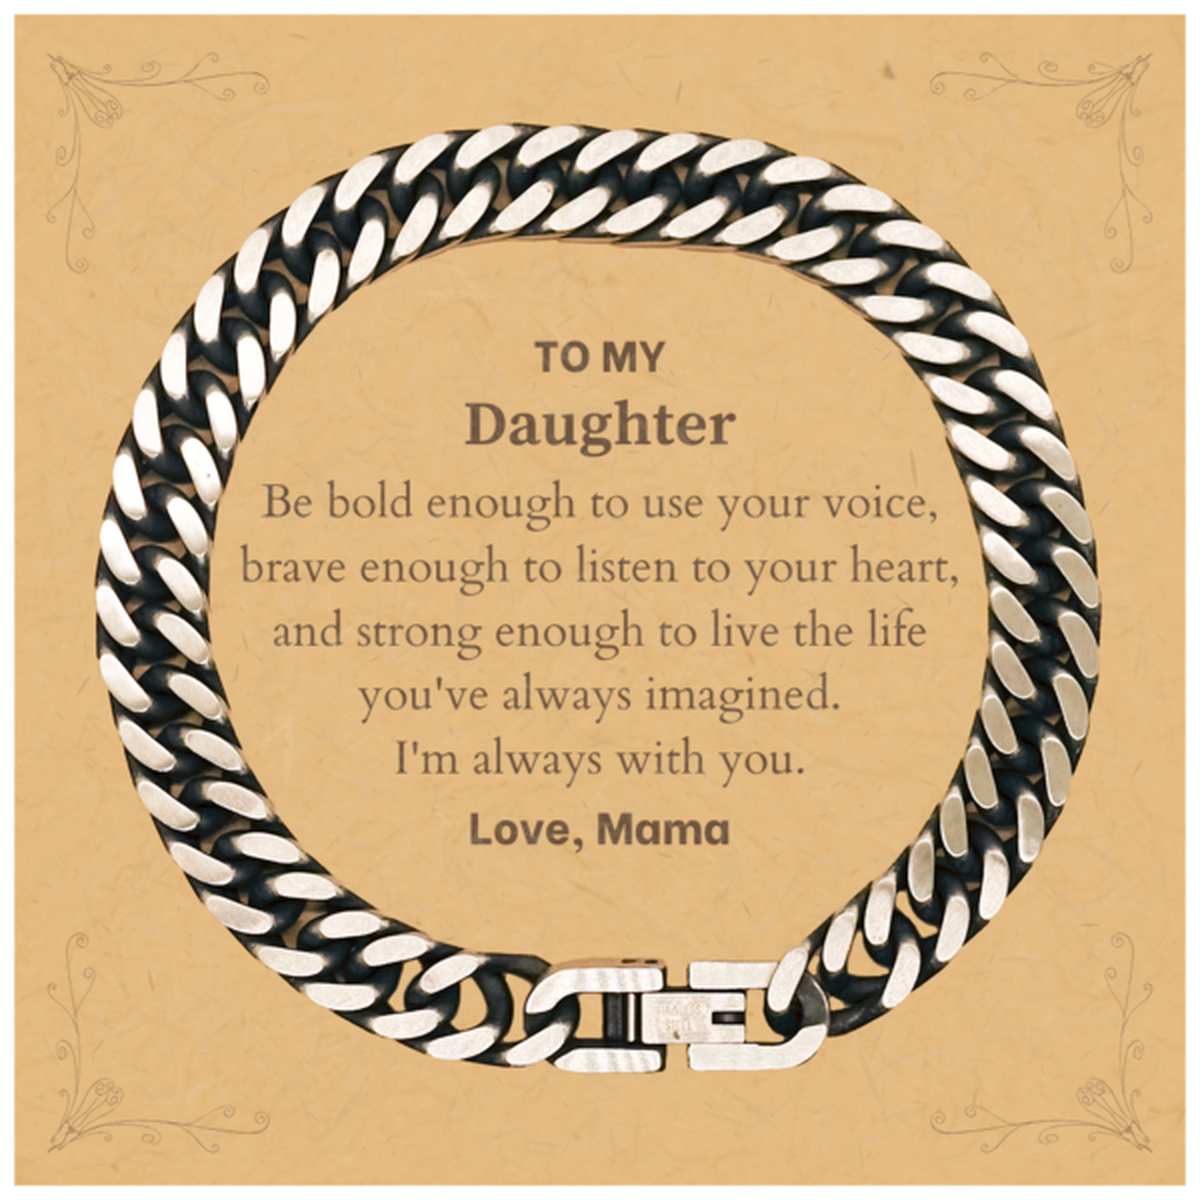 Keepsake Daughter Cuban Link Chain Bracelet Gift Idea Graduation Christmas Birthday Daughter from Mama, Daughter Be bold enough to use your voice, brave enough to listen to your heart. Love, Mama